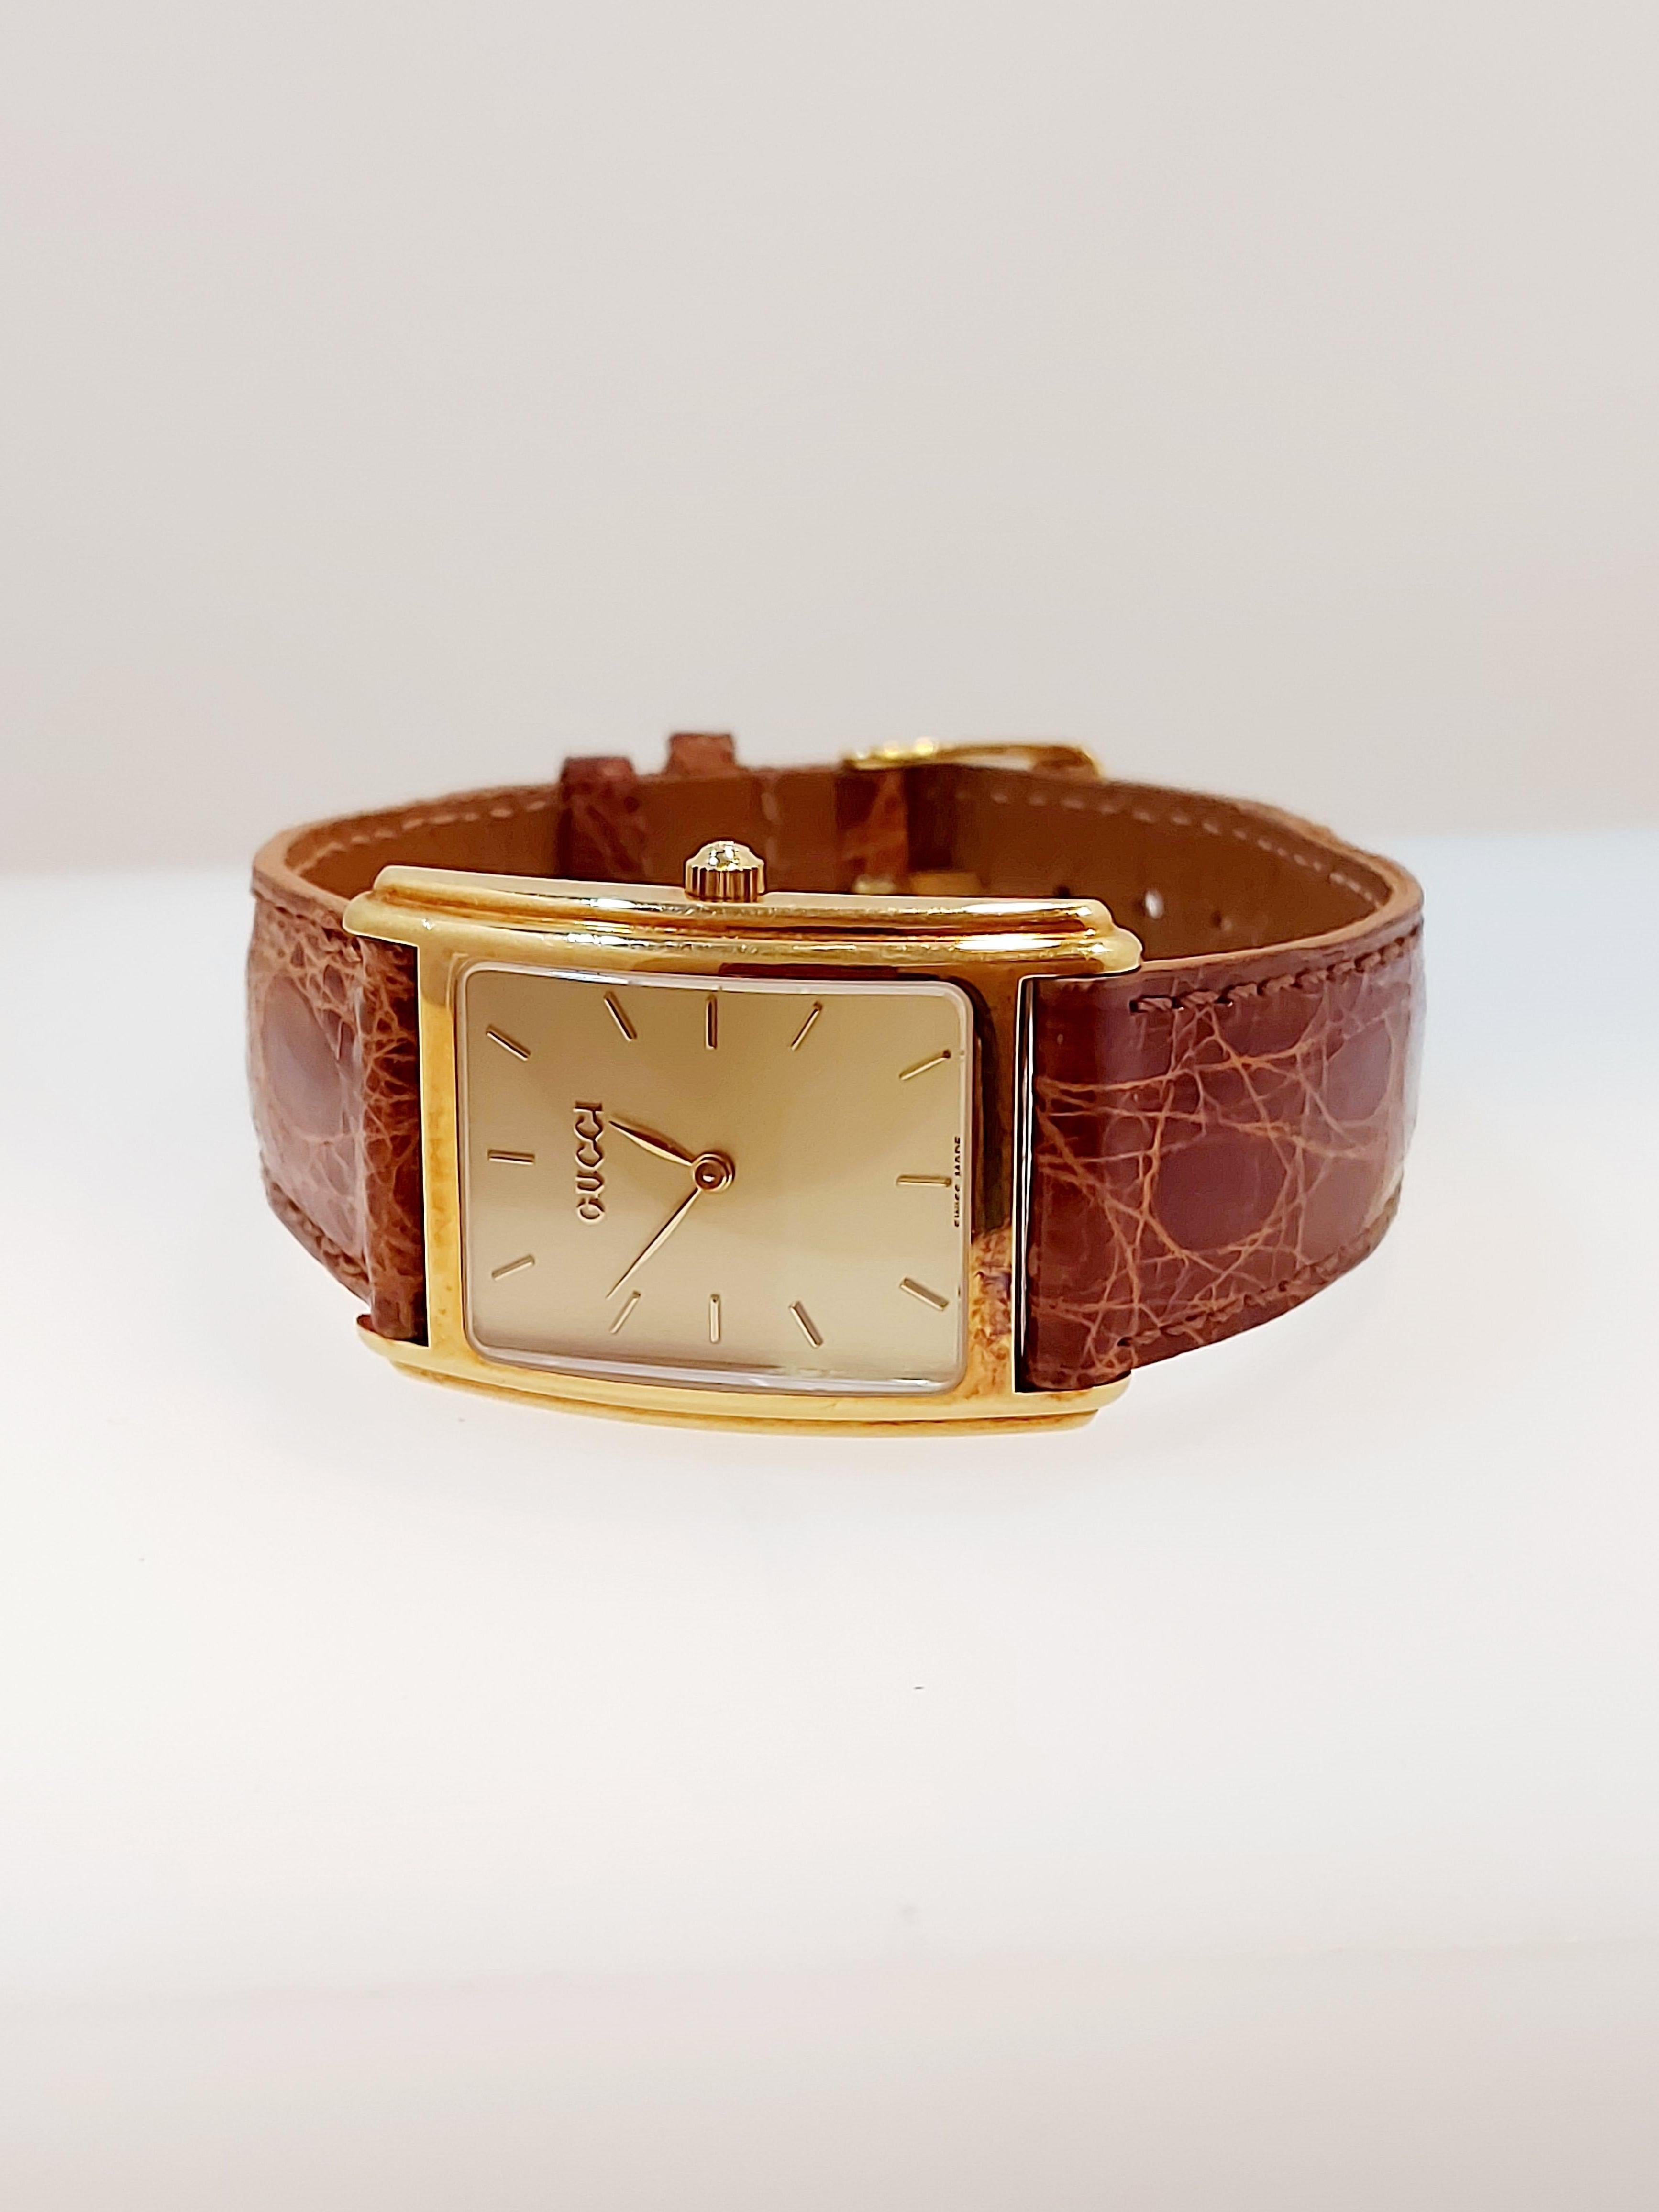 Rectangular Gucci quartz watch 18ct yellow gold on original Gucci brown leather strap with batons on a champagne dial, model number 715 M serial number 0002368.